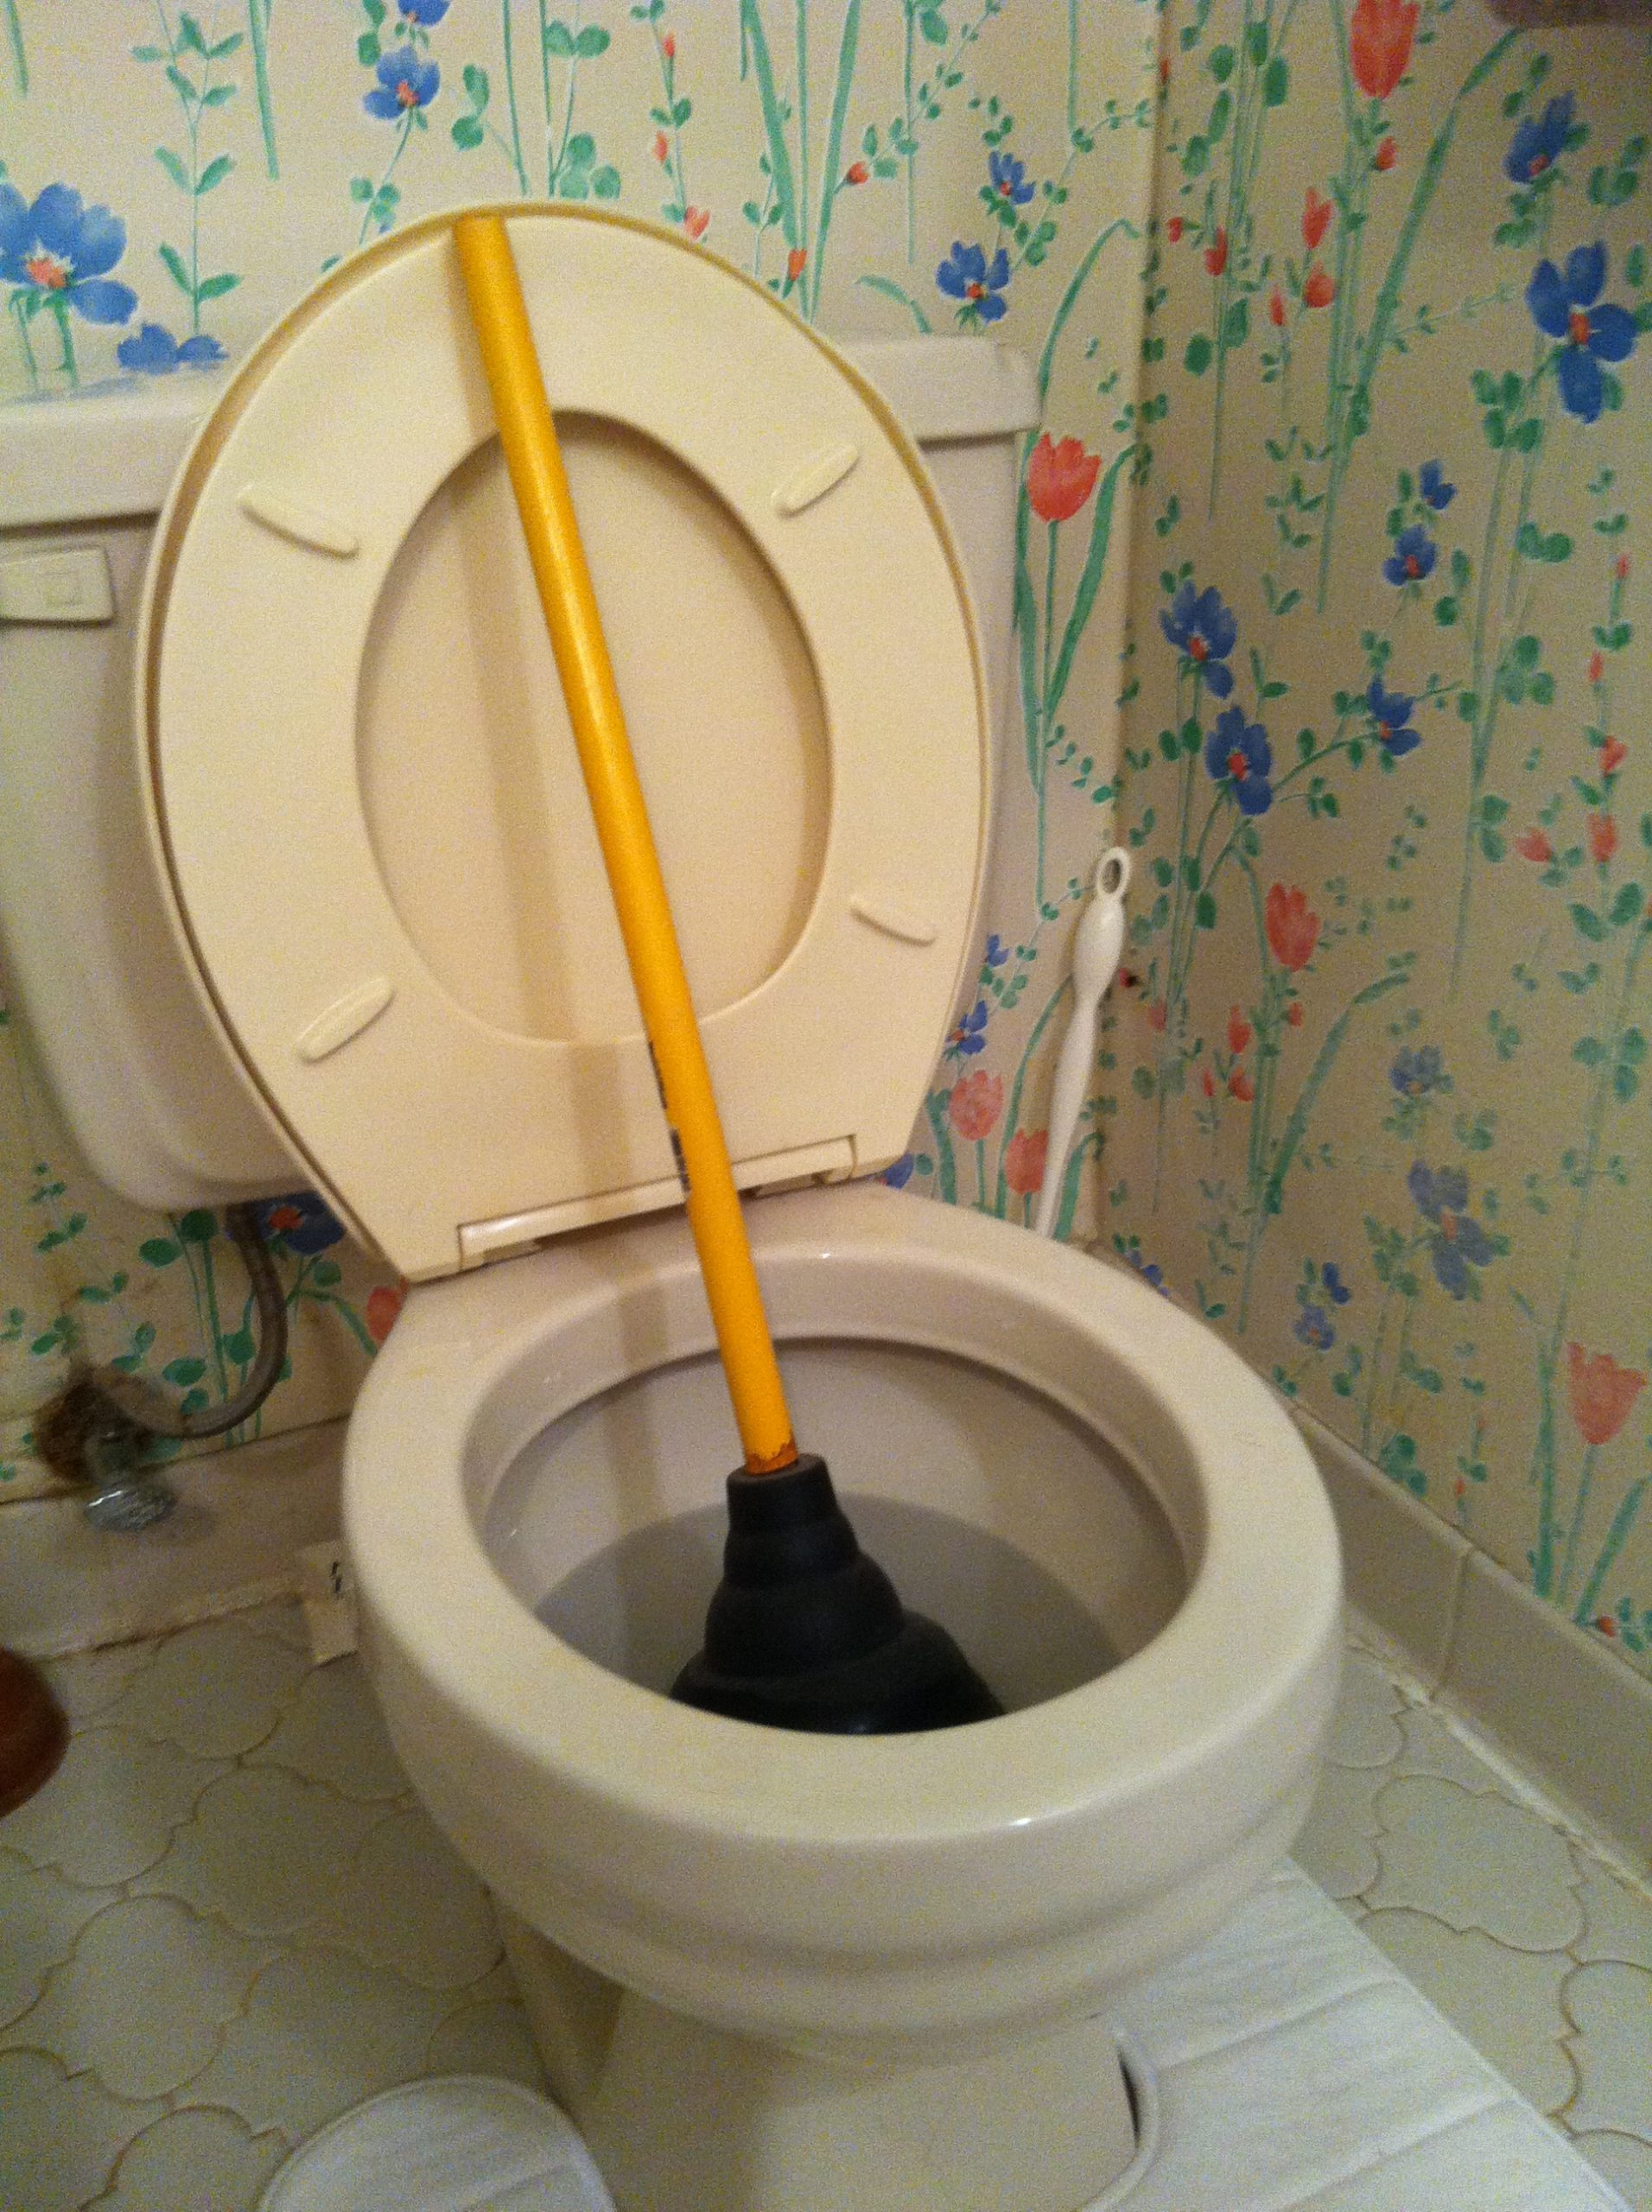 Drain & Toilet Plunger to Avoid Clogging